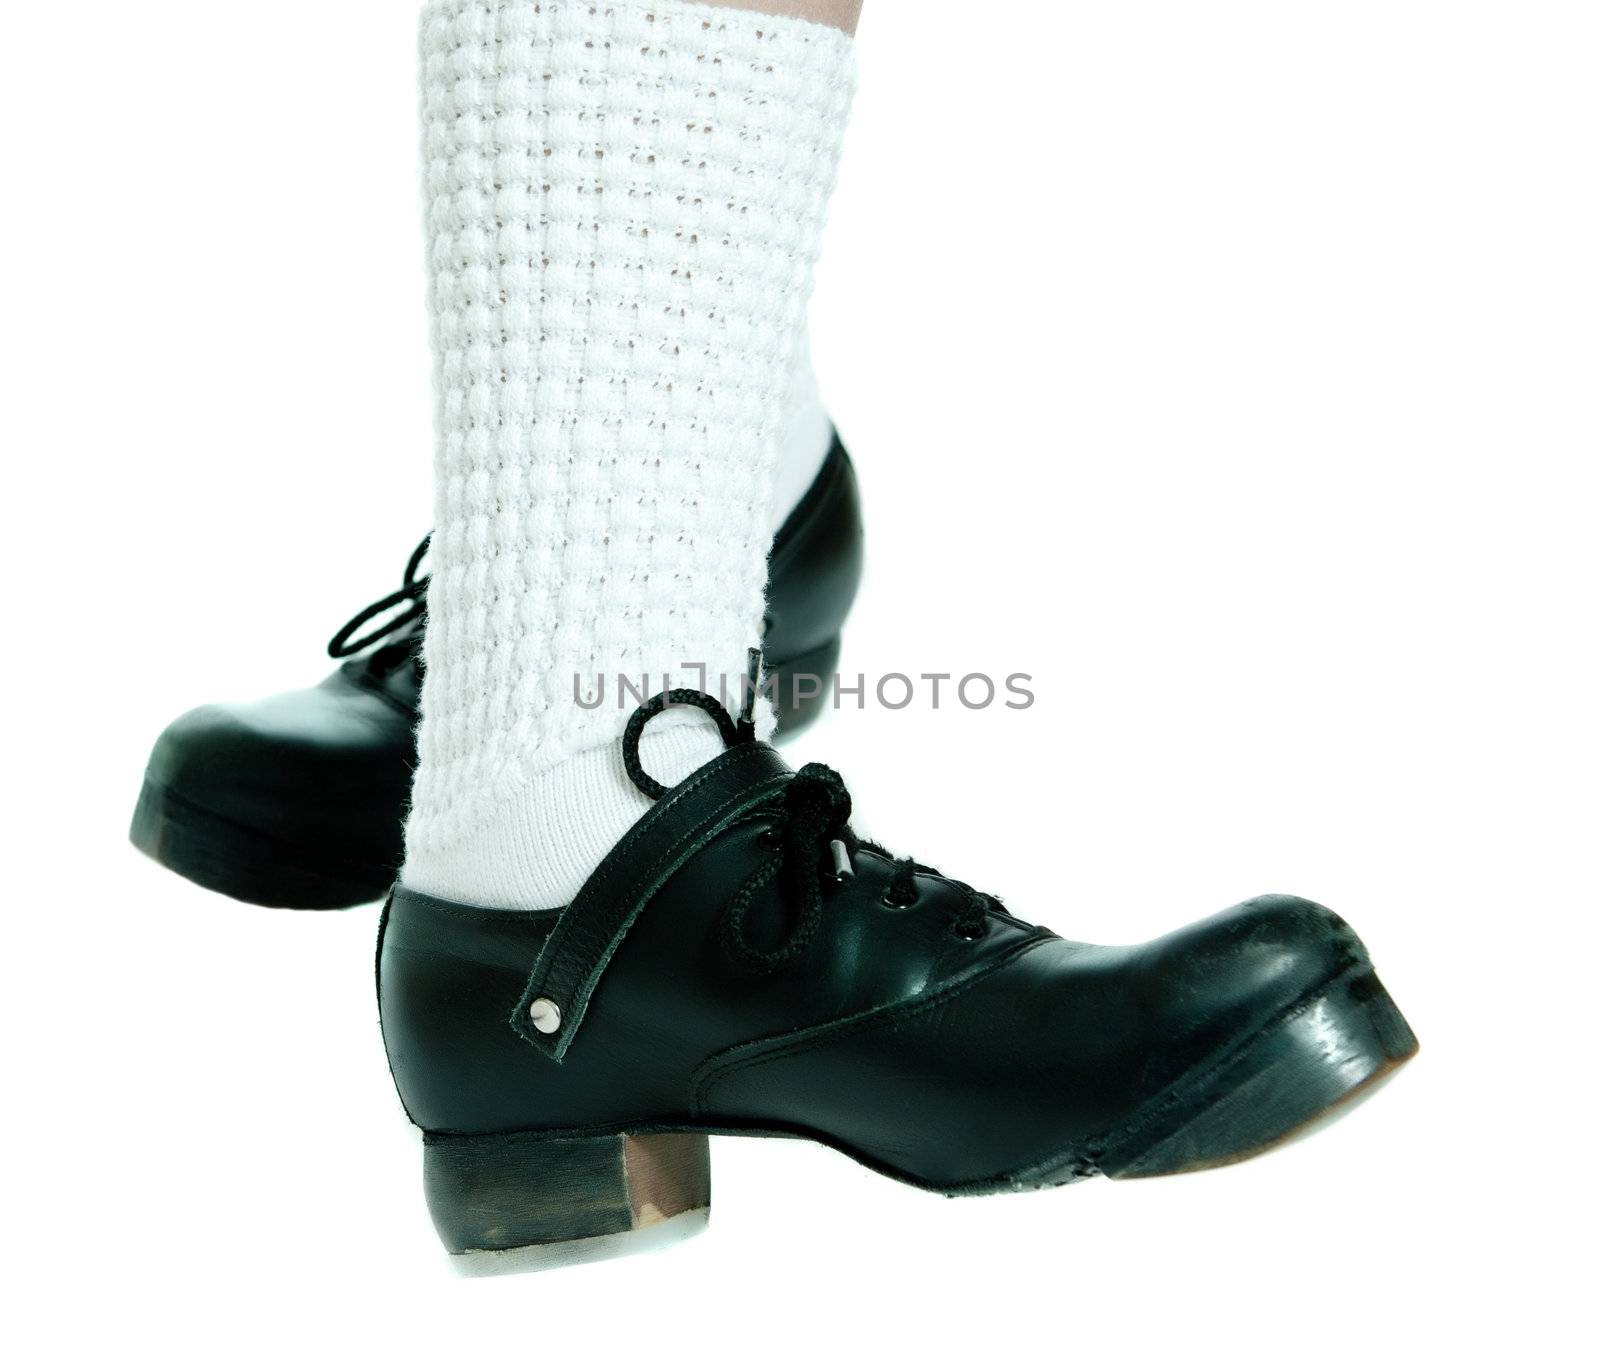 Closeup view of a pair of irish dancing shoes, isolated against a white background.